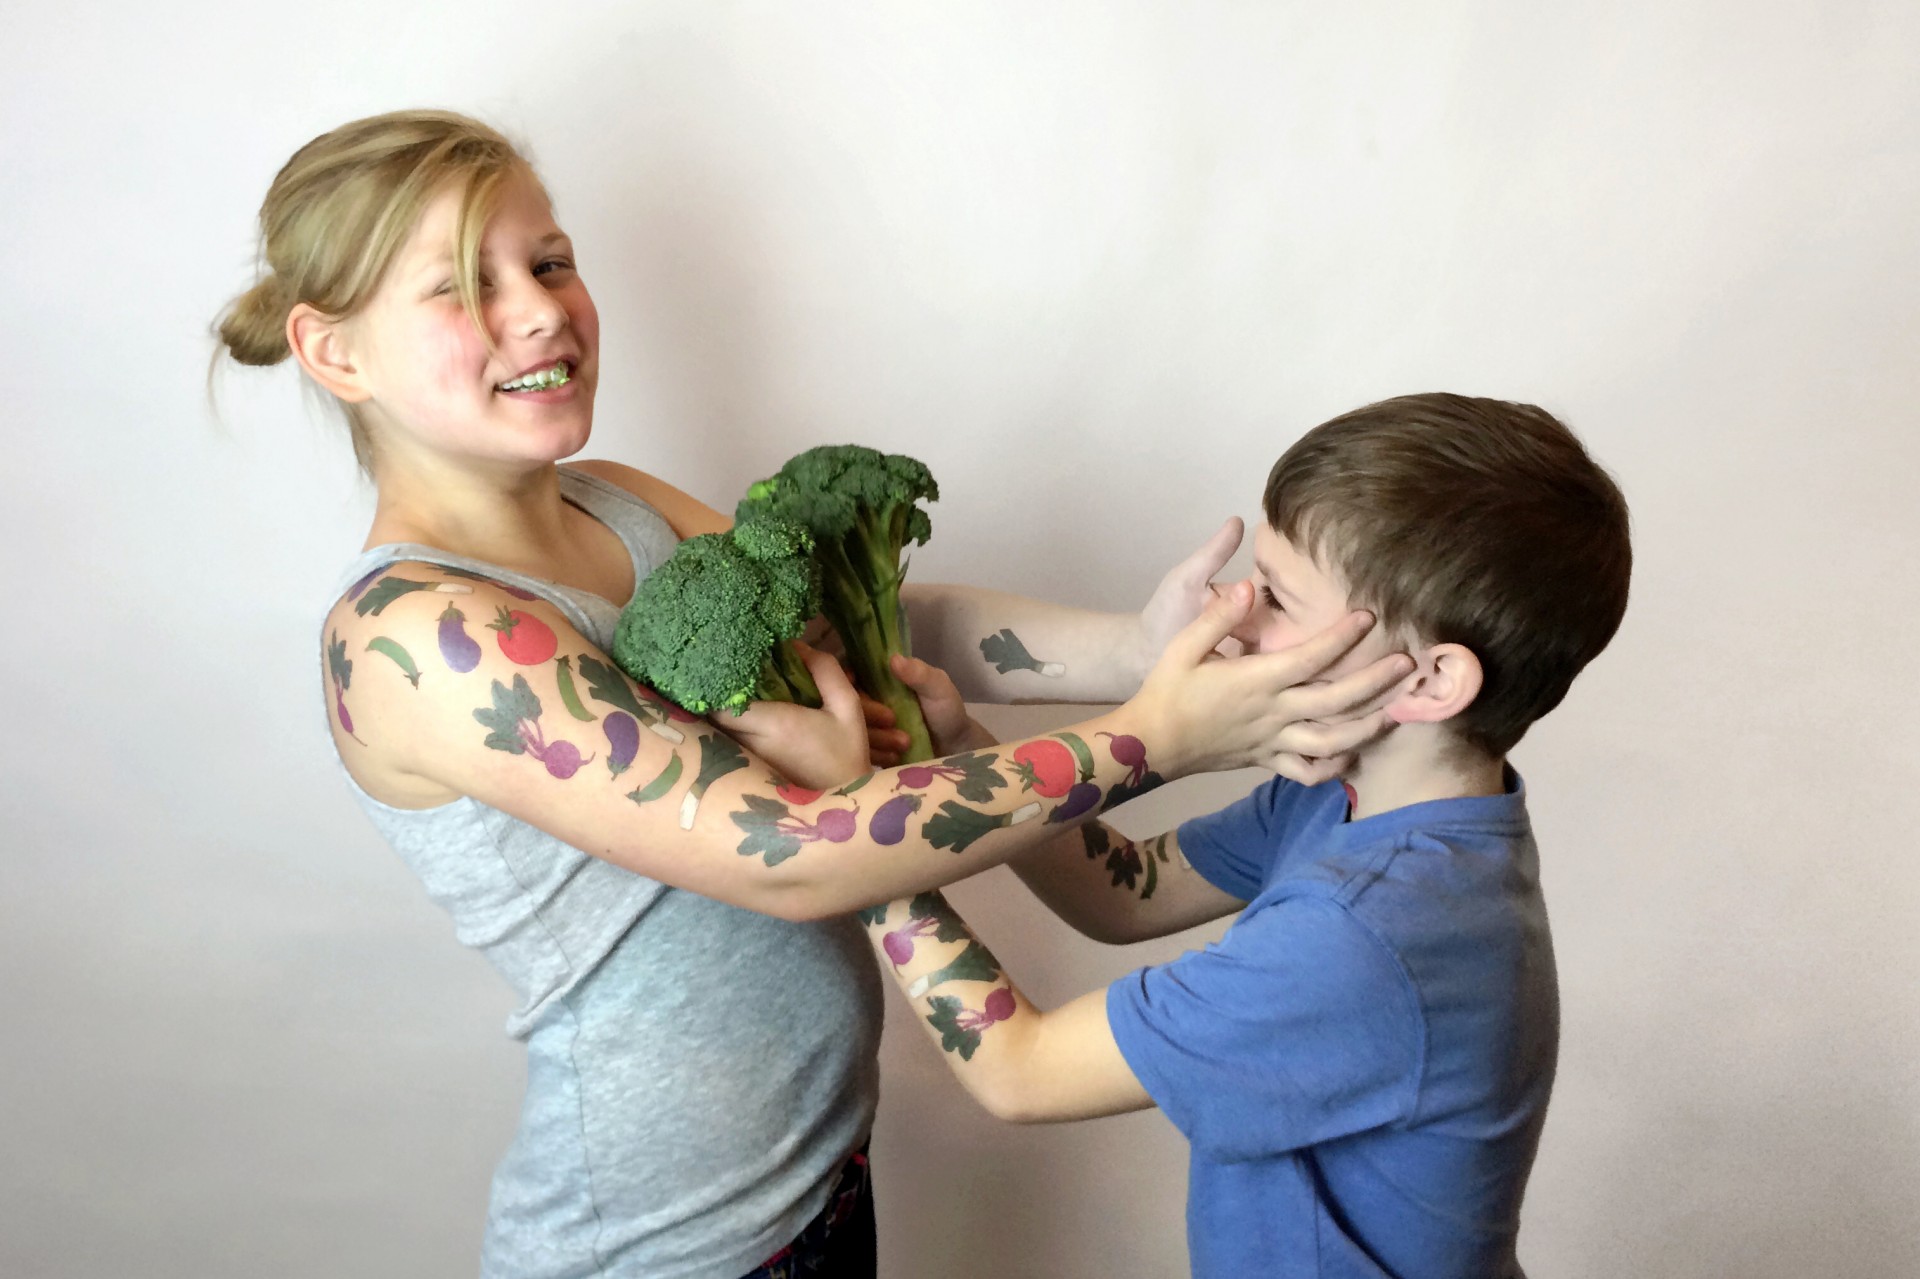 Siblings Jessica and Oliver Schaap of Holland, Mich., test out the temporary vegetable tattoos known as Tater Tats. Photo: Courtesy of Jenna Weiler